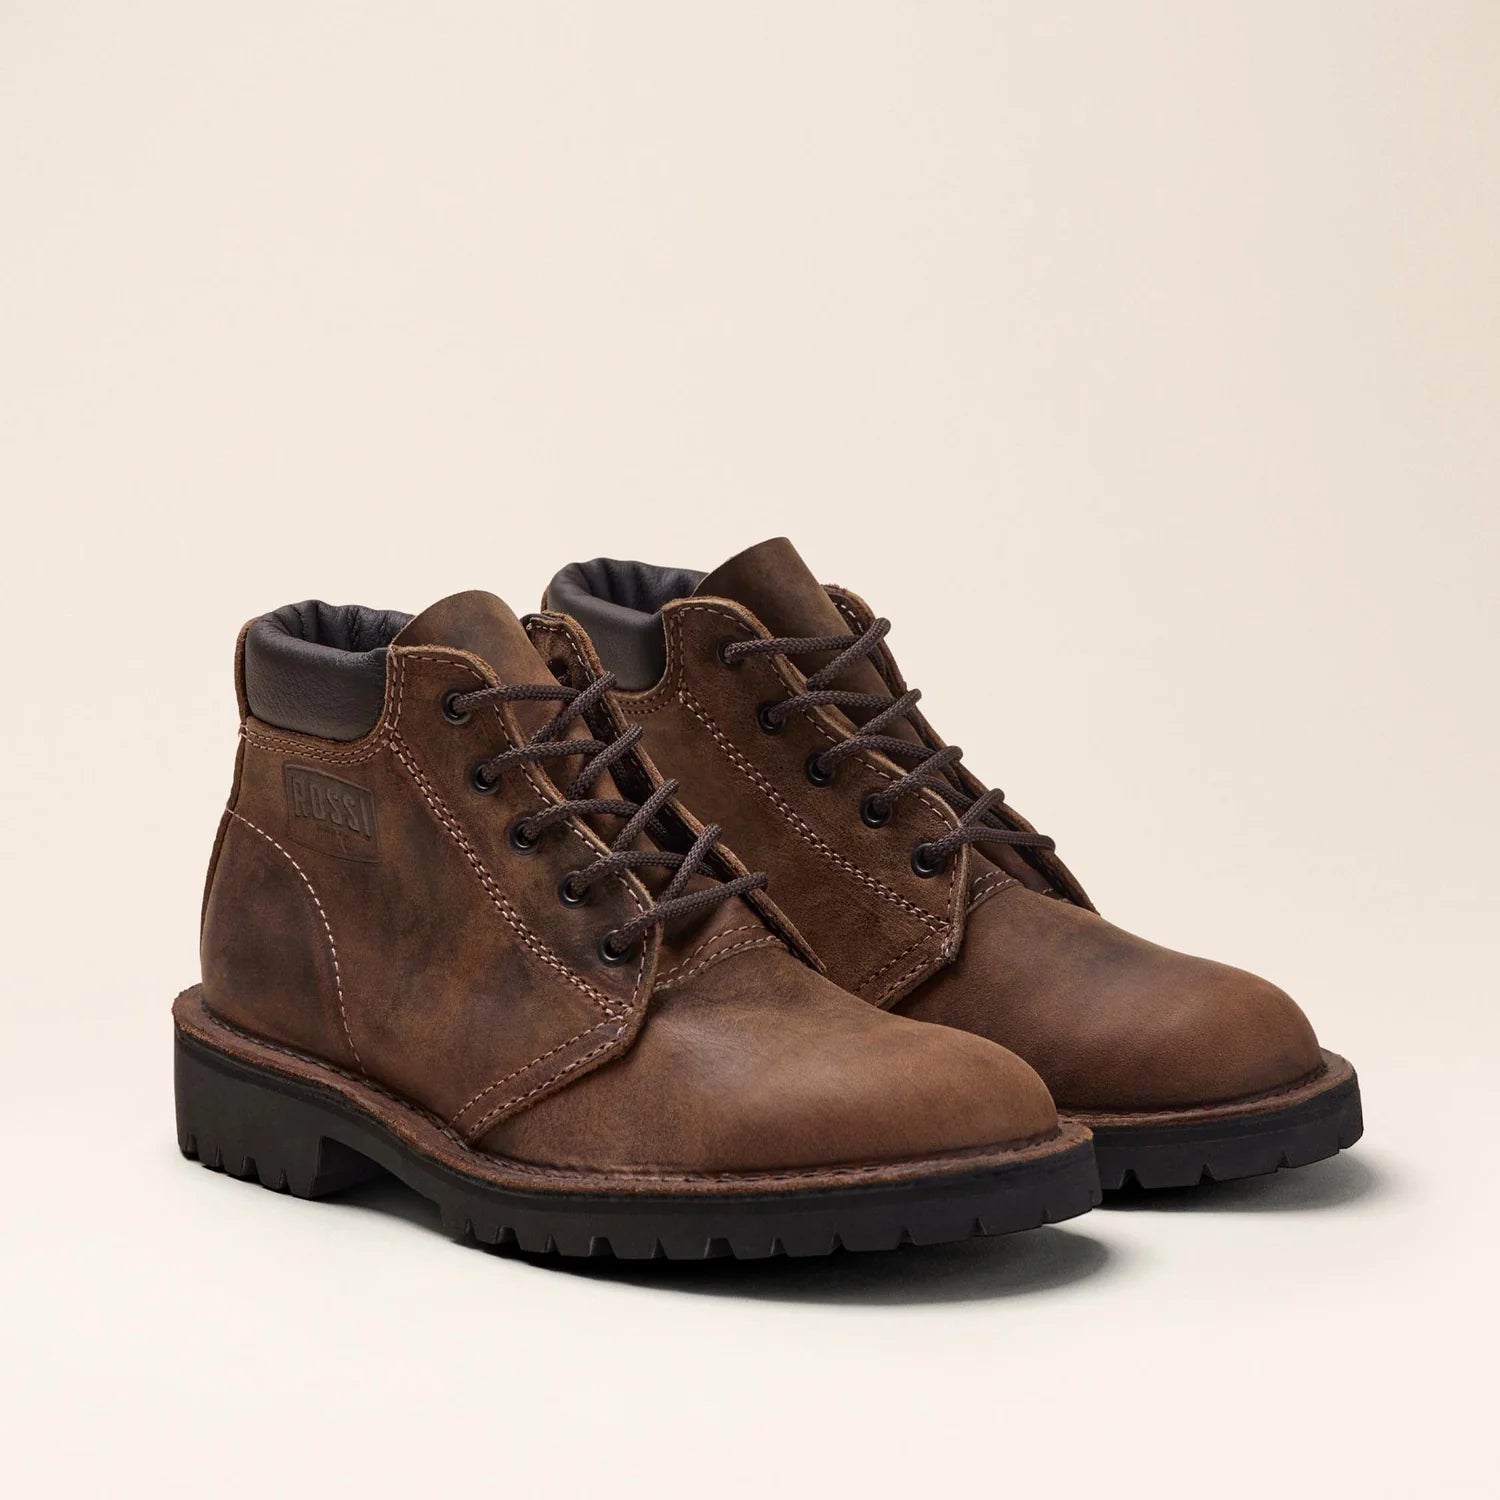 Rossi Mulga Walking Boots in Tan. Model number 4002 at The Bloke Shop, South of Adelaide